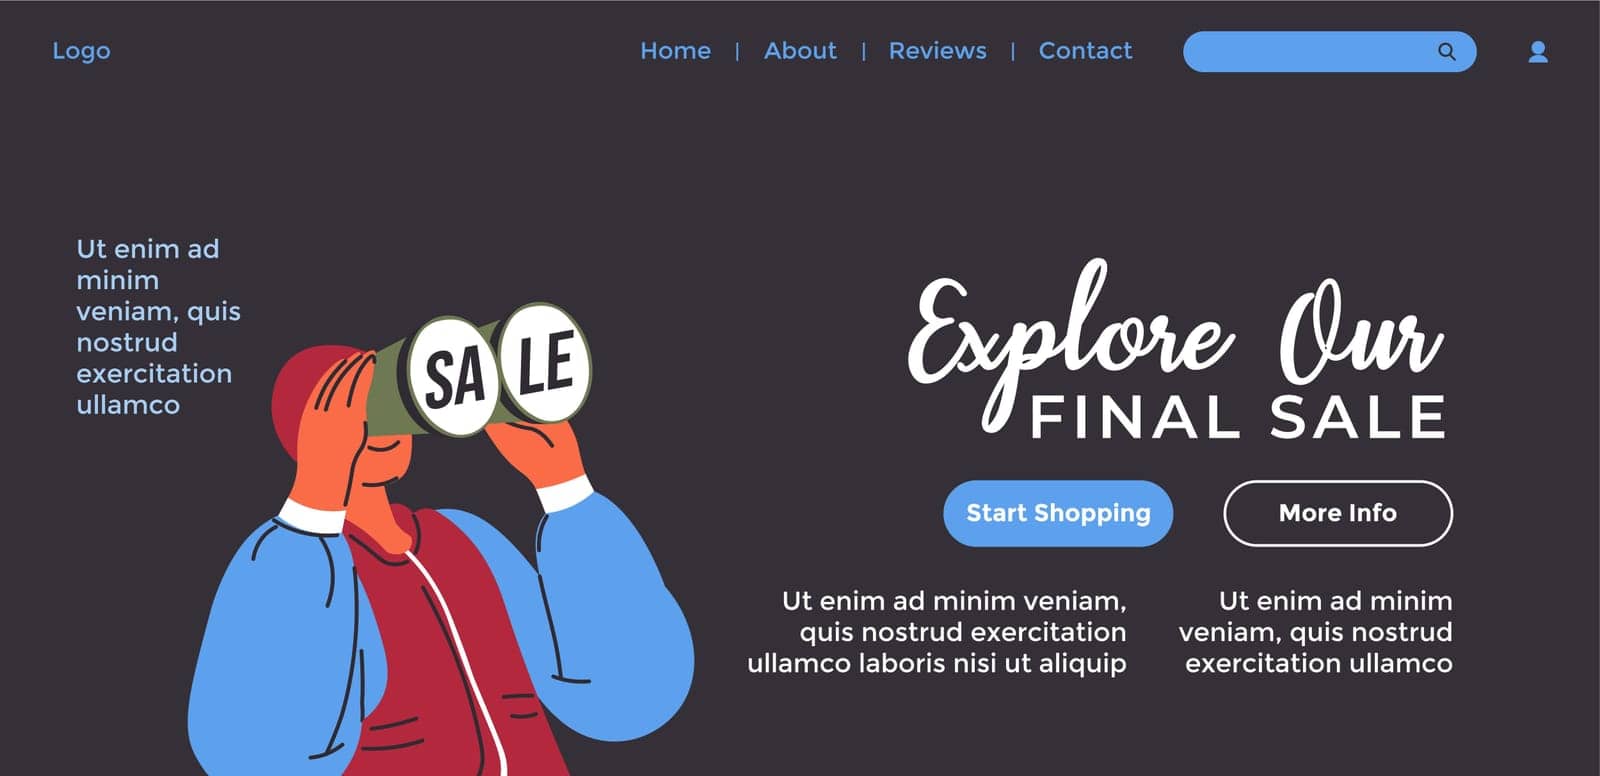 Final sale, explore our shop with discounts and special offers for clients and customers. Buy goods and order online, get more info. Website landing page template, internet site. Vector in flat style